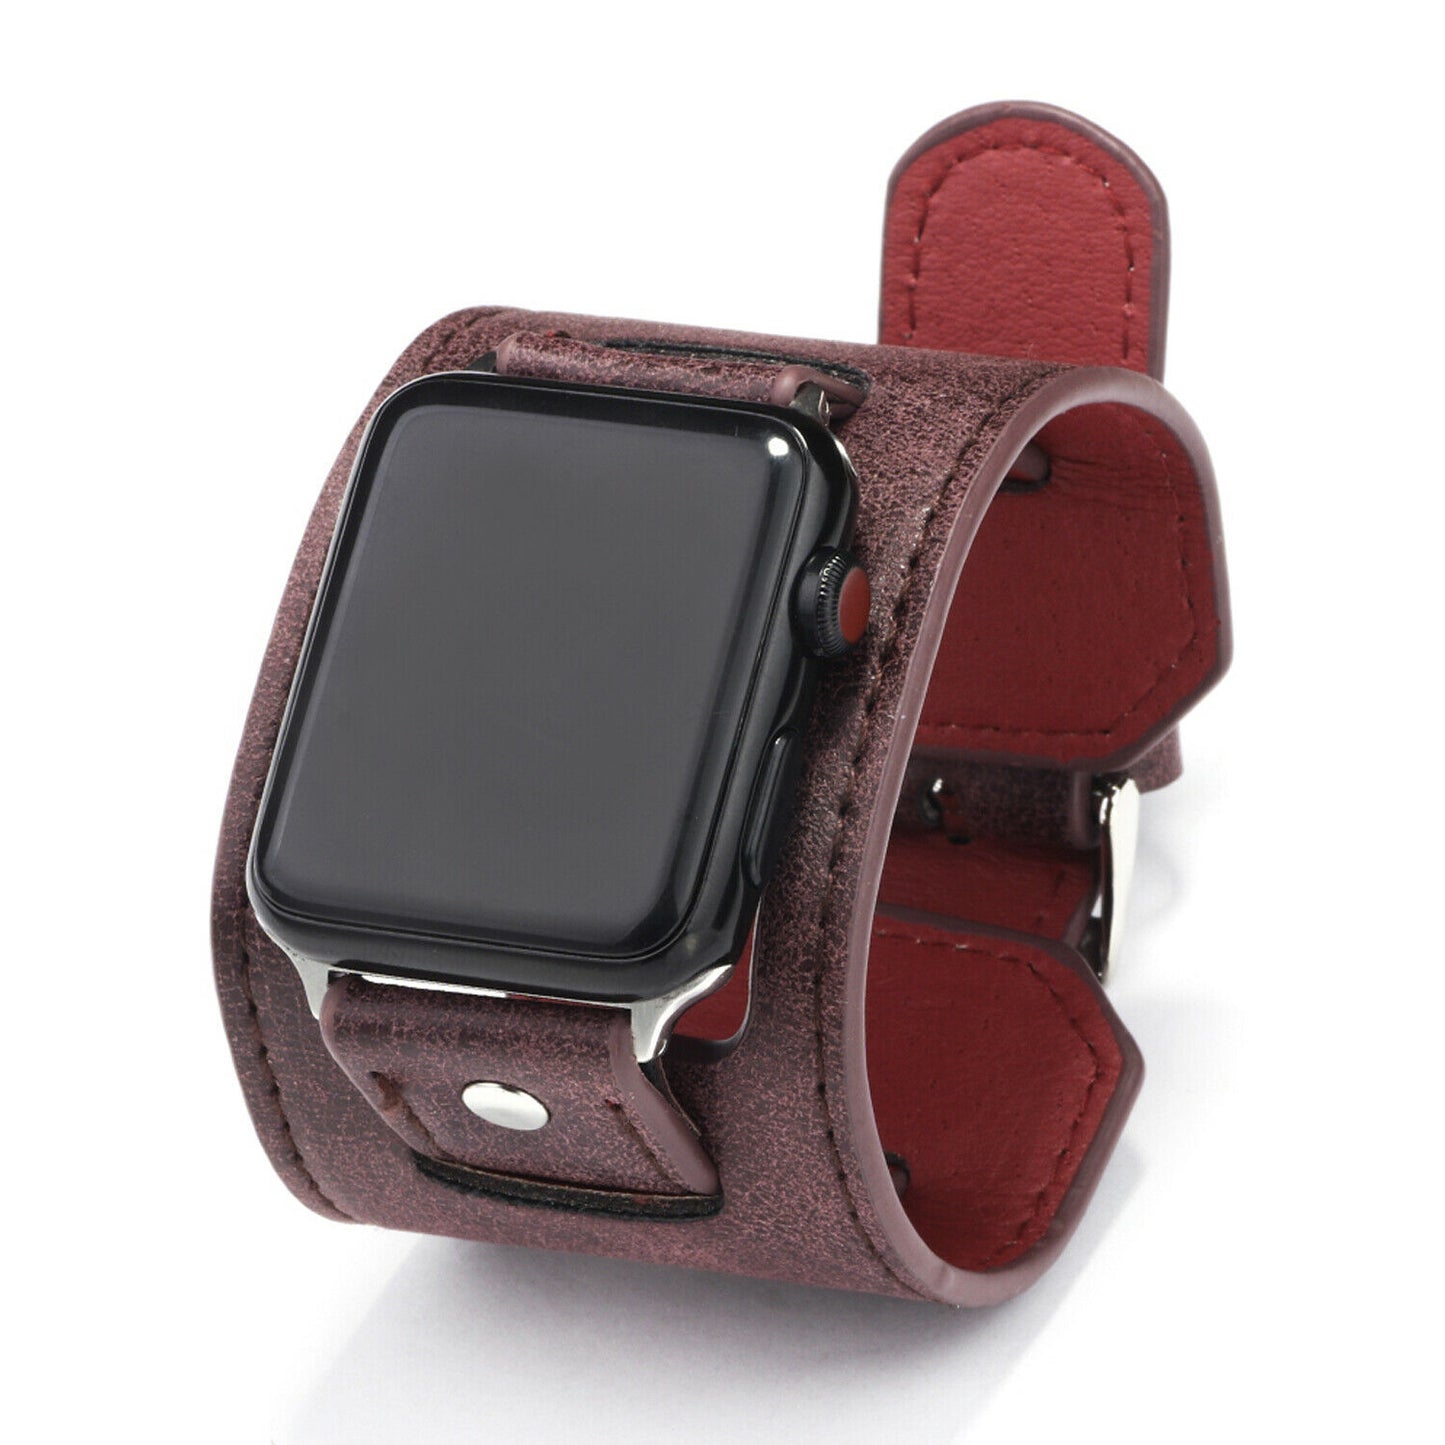 Leather Wide Cuff Band compatible with Apple Watch, 3-Piece Strap